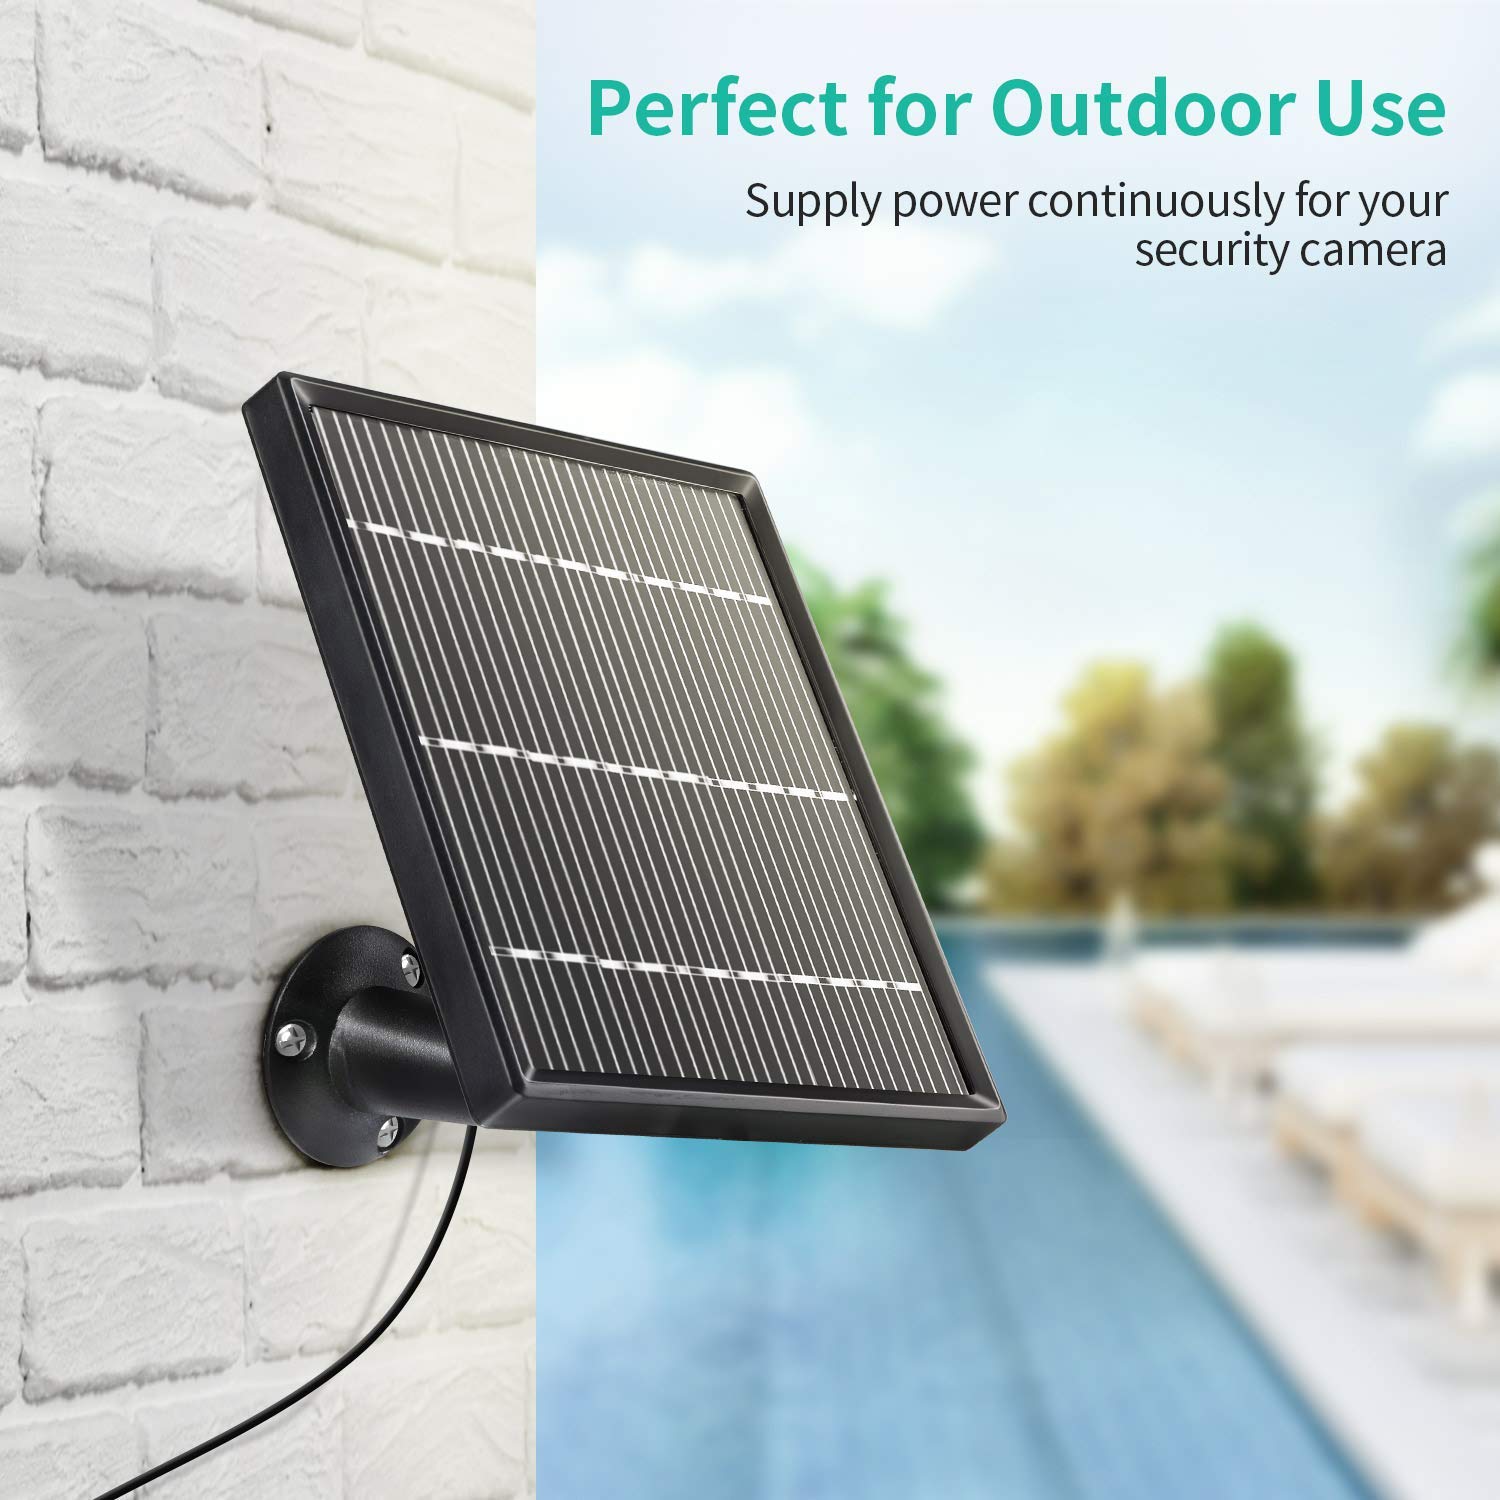 HeimVision SE01 Solar Panel Compatible with HeimVision HMD2 Security Camera, Waterproof 3.2W/ 5.5V Solar Panel with 13ft/ 4m USB Cable, Support Continuously Supply Power for Security Camera - image 4 of 6